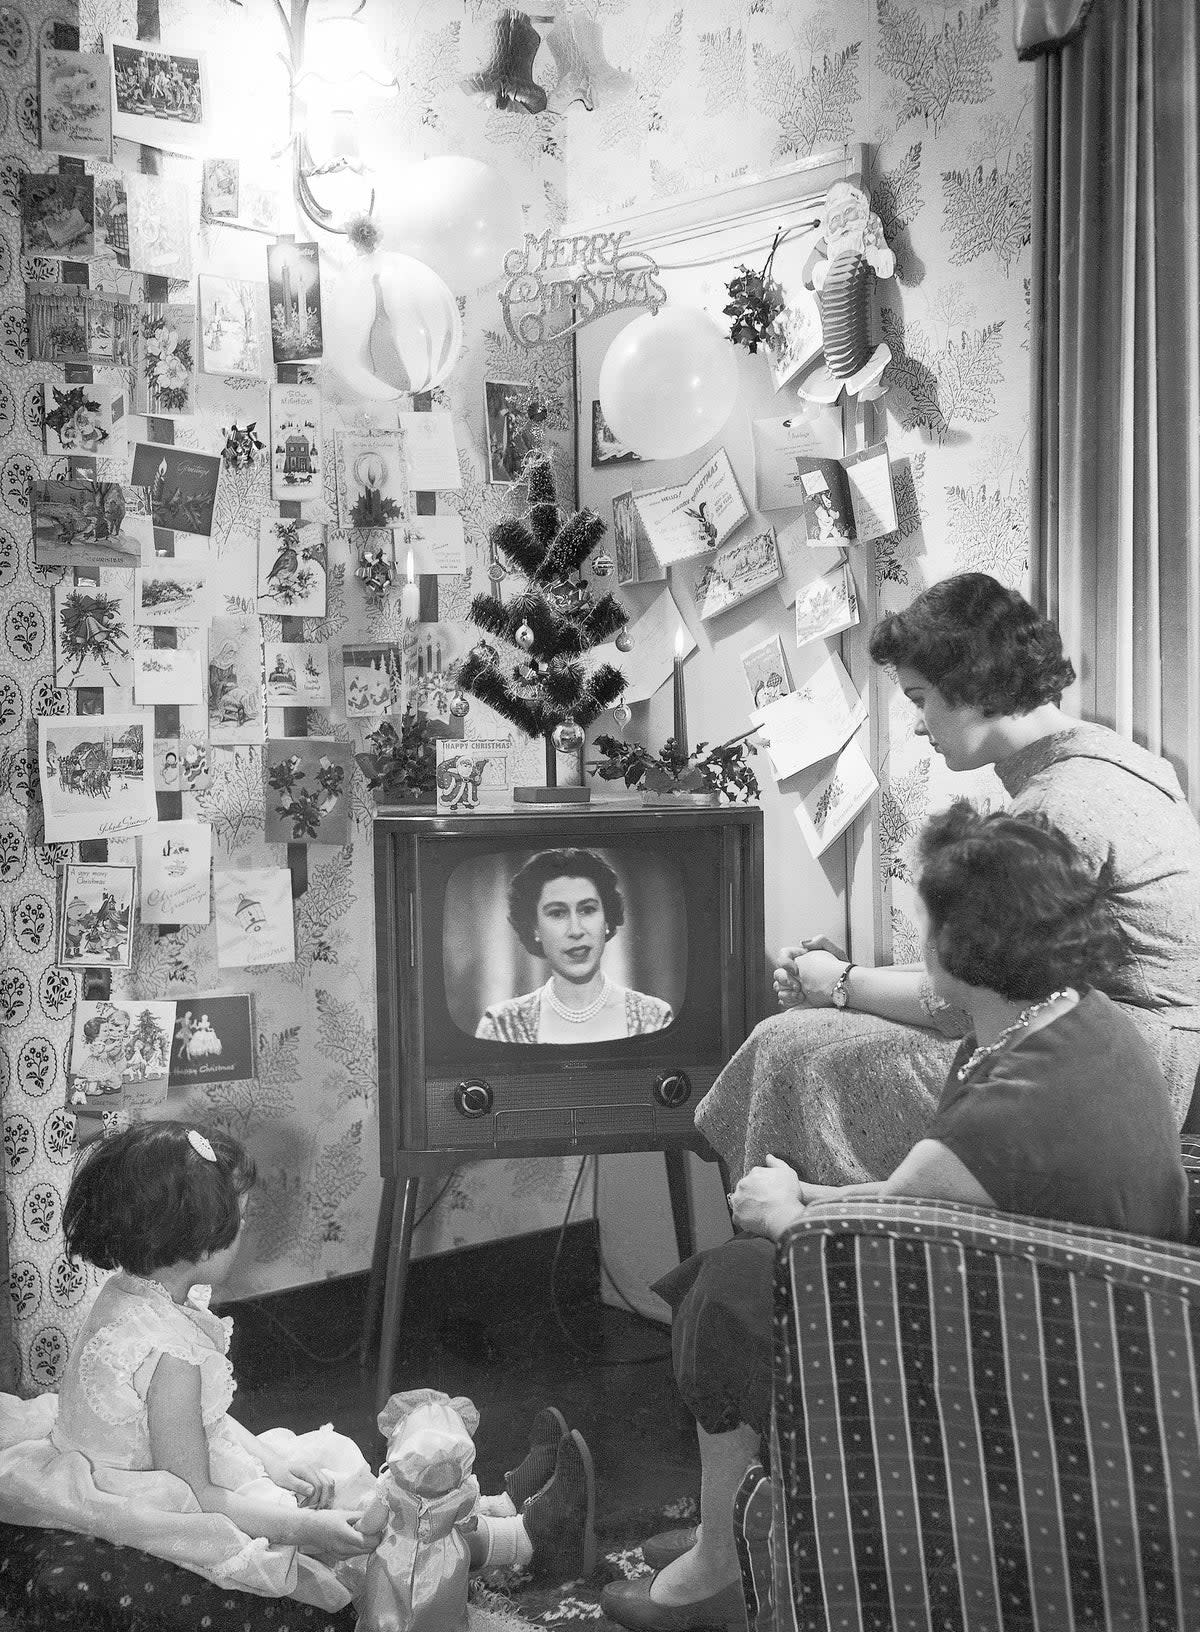 A family watch as Britain's Queen Elizabeth II makes her first televised Christmas broadcast on 25 December, 1957 (Copyright 2021 The Associated Press. All rights reserved.)